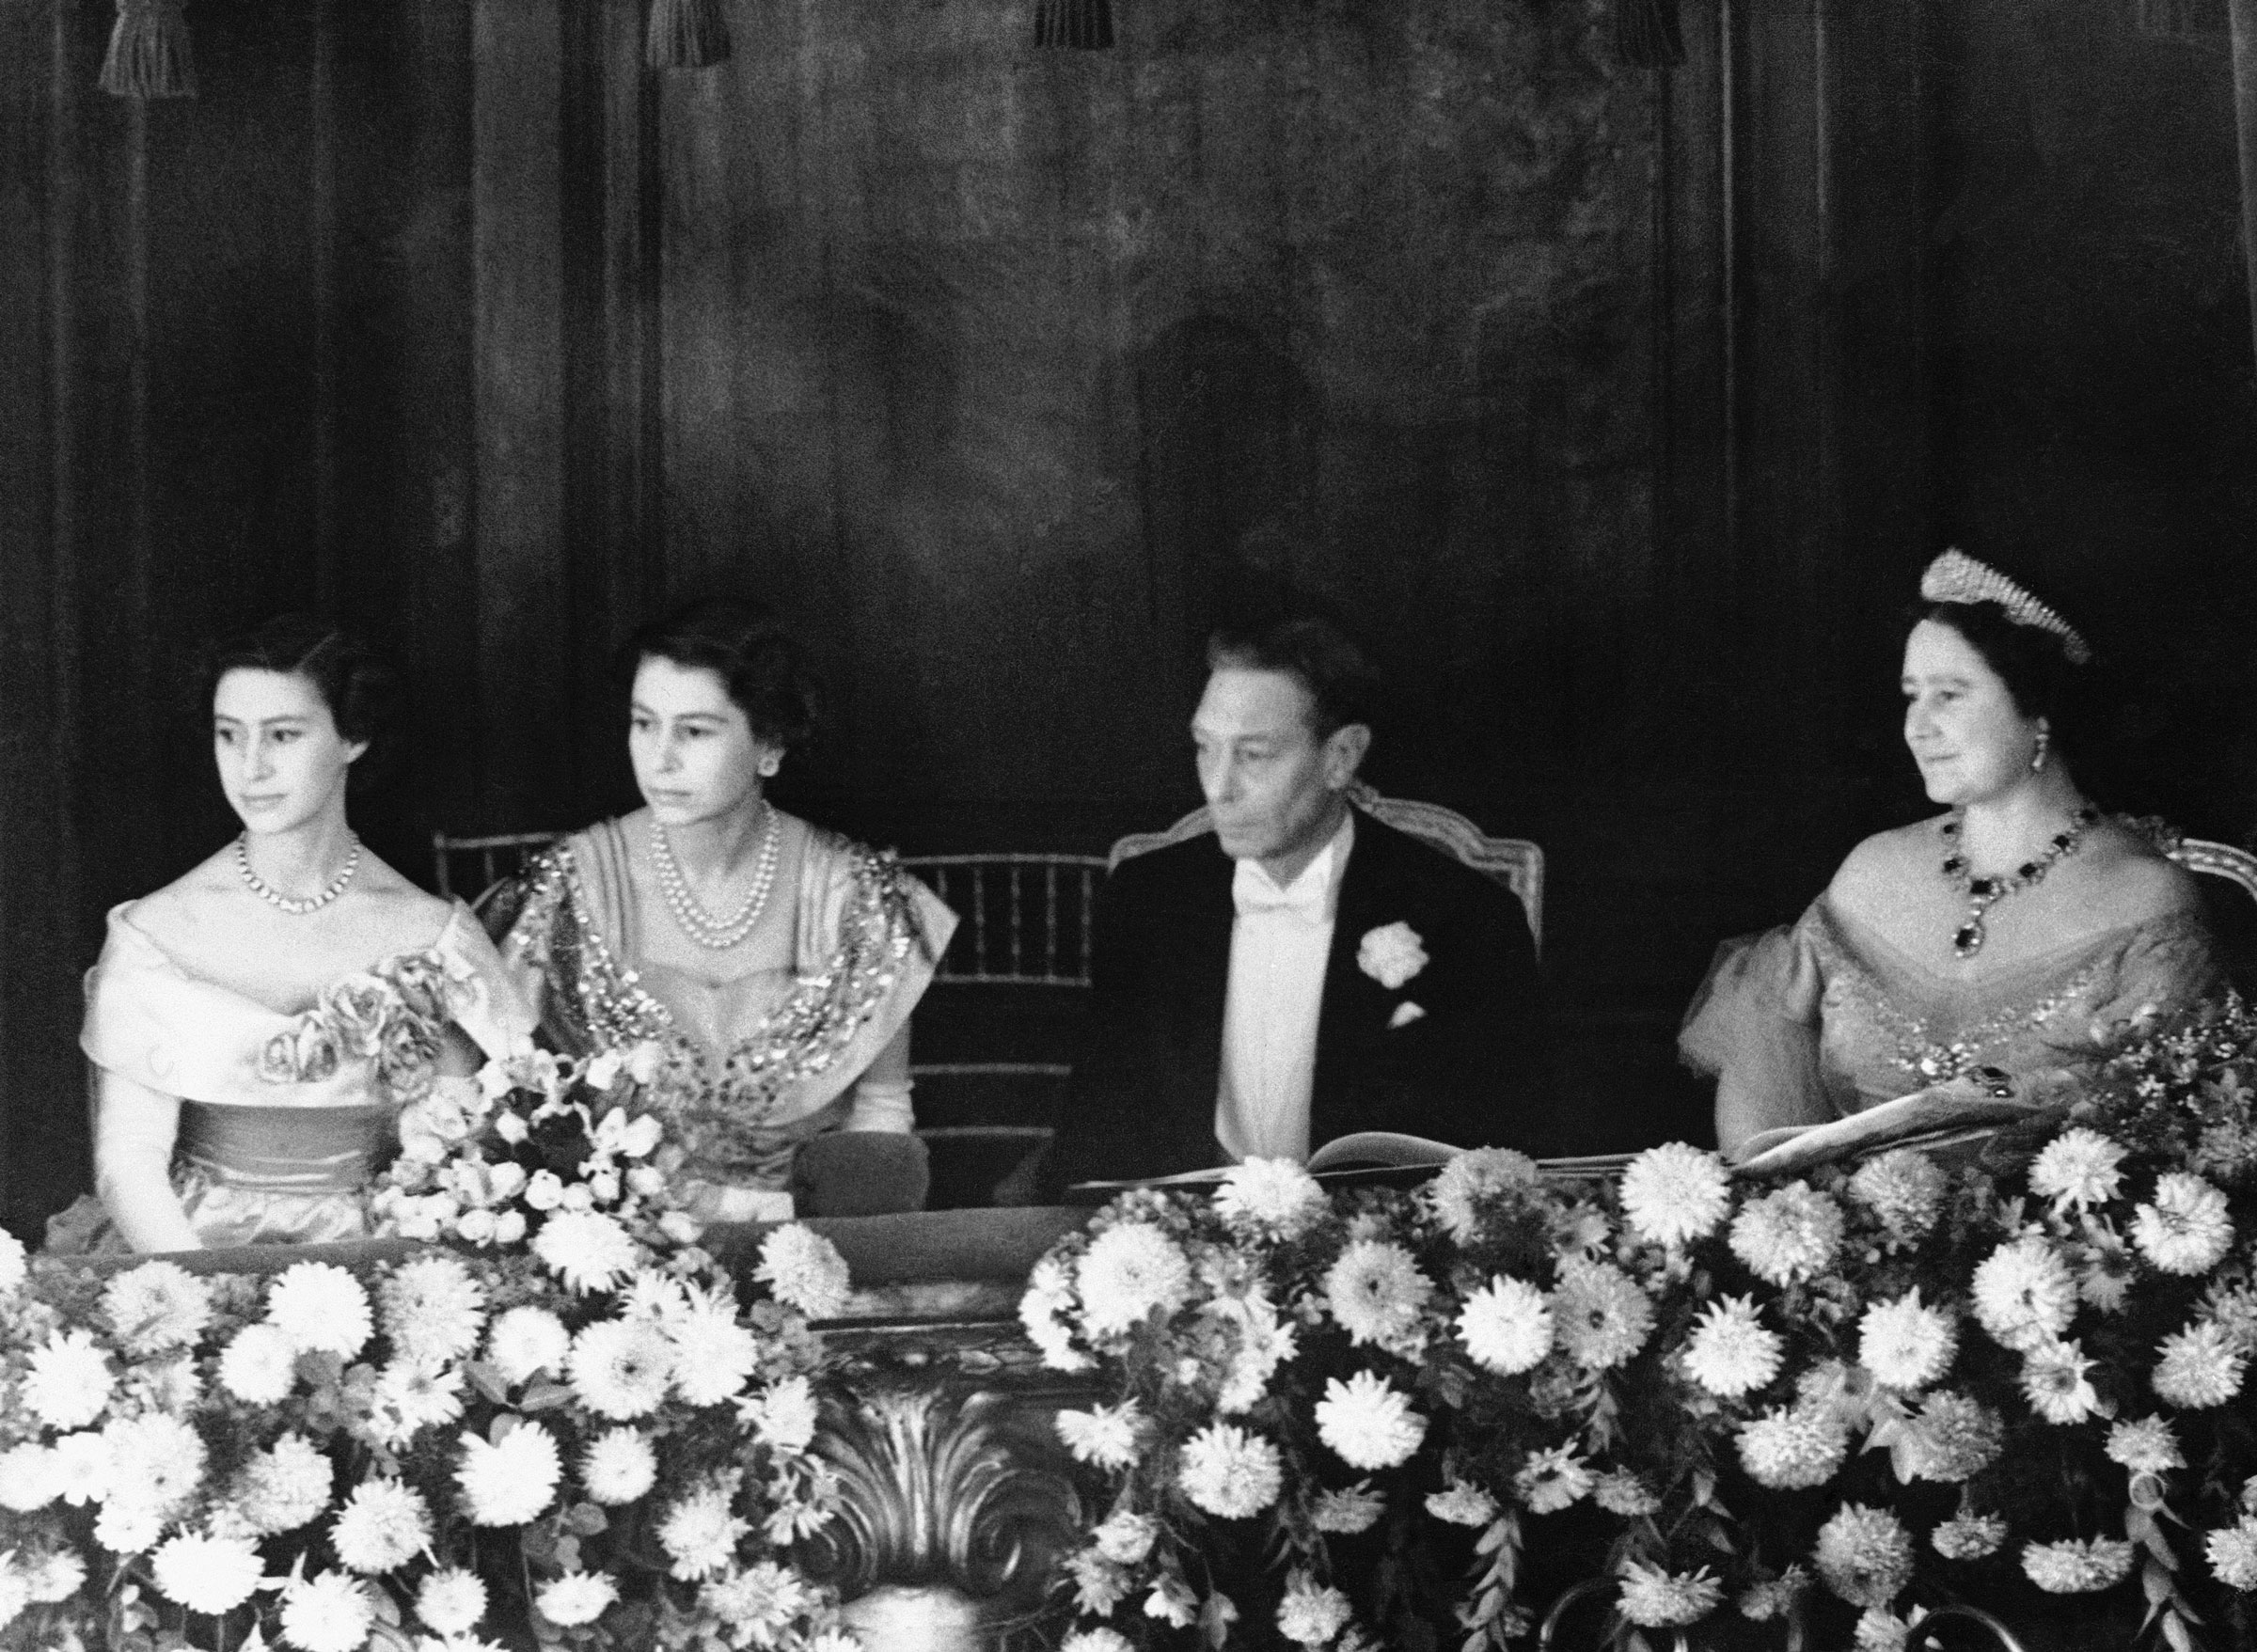 King George VI and Queen Elizabeth sit with Princesses Margaret Rose and Elizabeth in their box in London’s Palladium Theater, on Nov. 13, 1950.